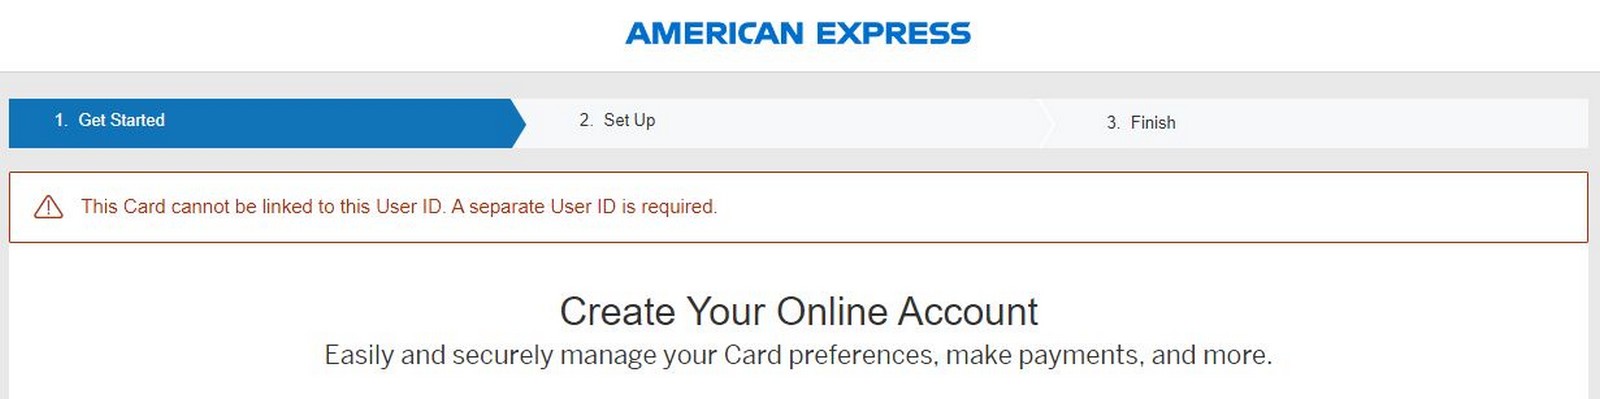 American Express Card Activation Issues